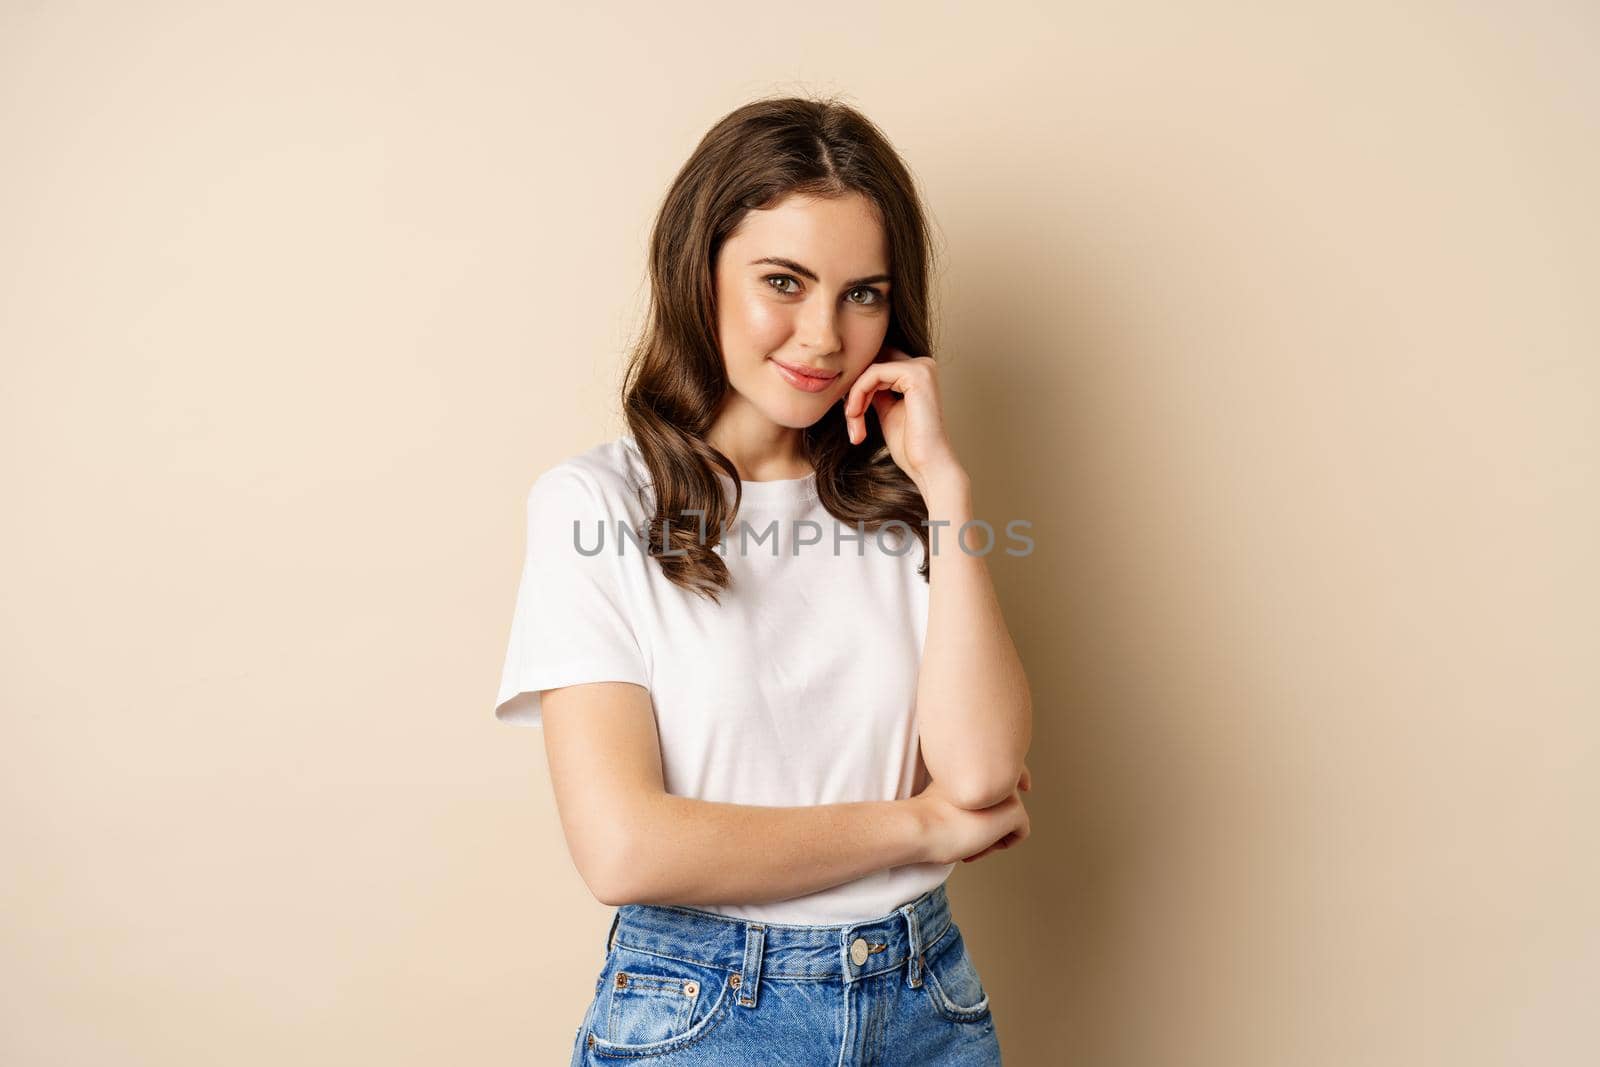 Portrait of beautiful young woman in white t-shirt, smiling and looking happy, posing against beige background.